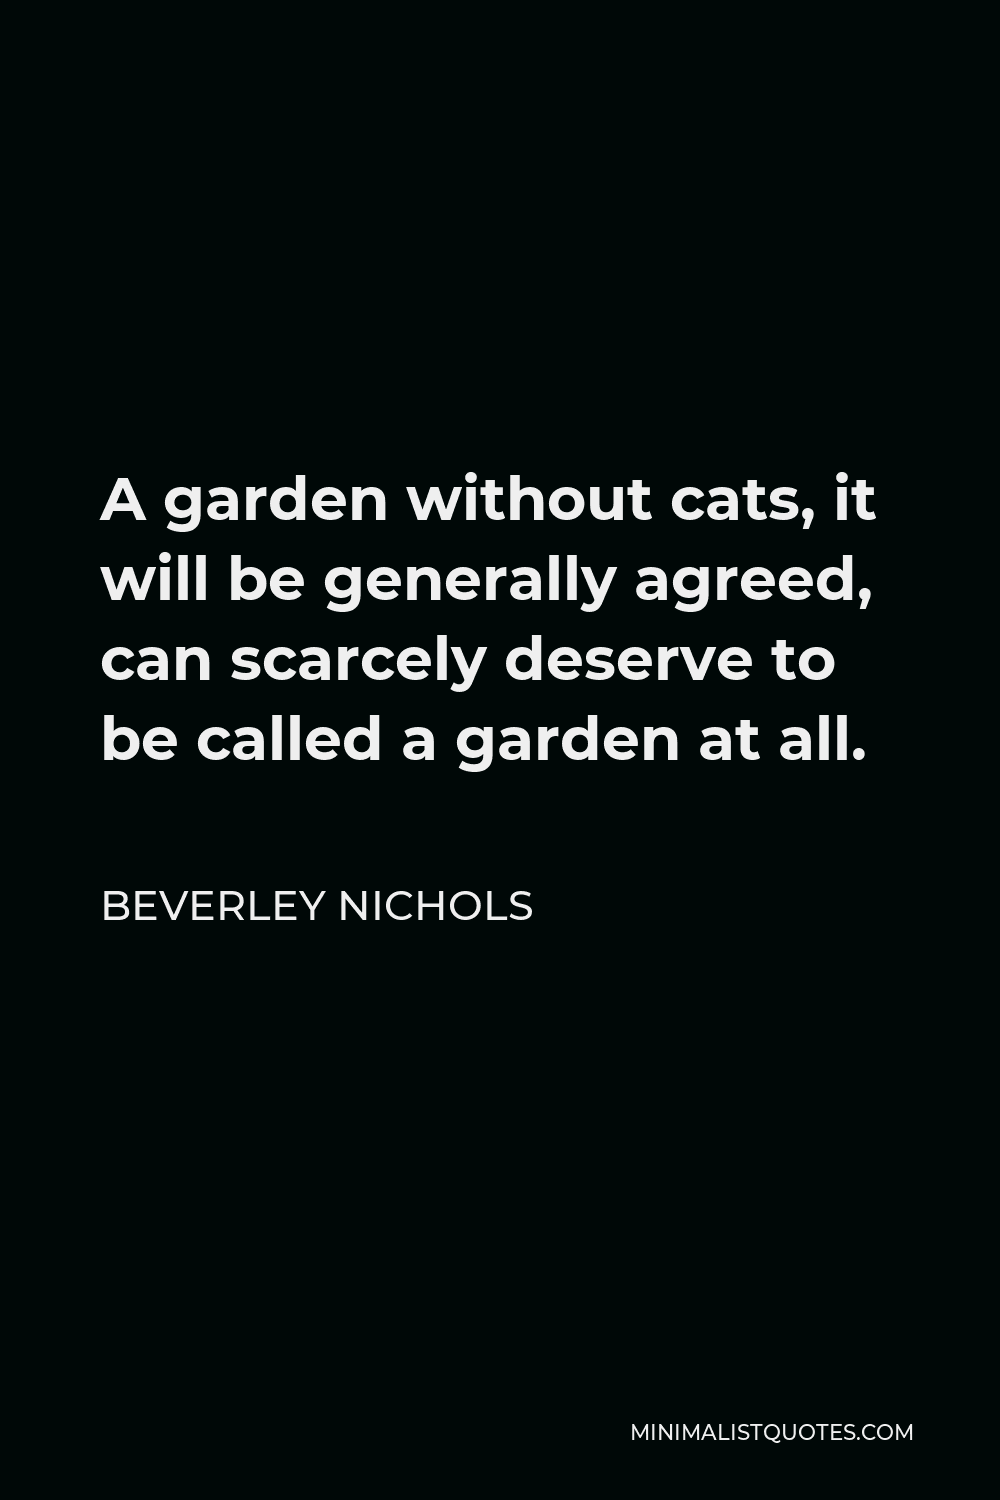 Beverley Nichols Quote - A garden without cats, it will be generally agreed, can scarcely deserve to be called a garden at all.